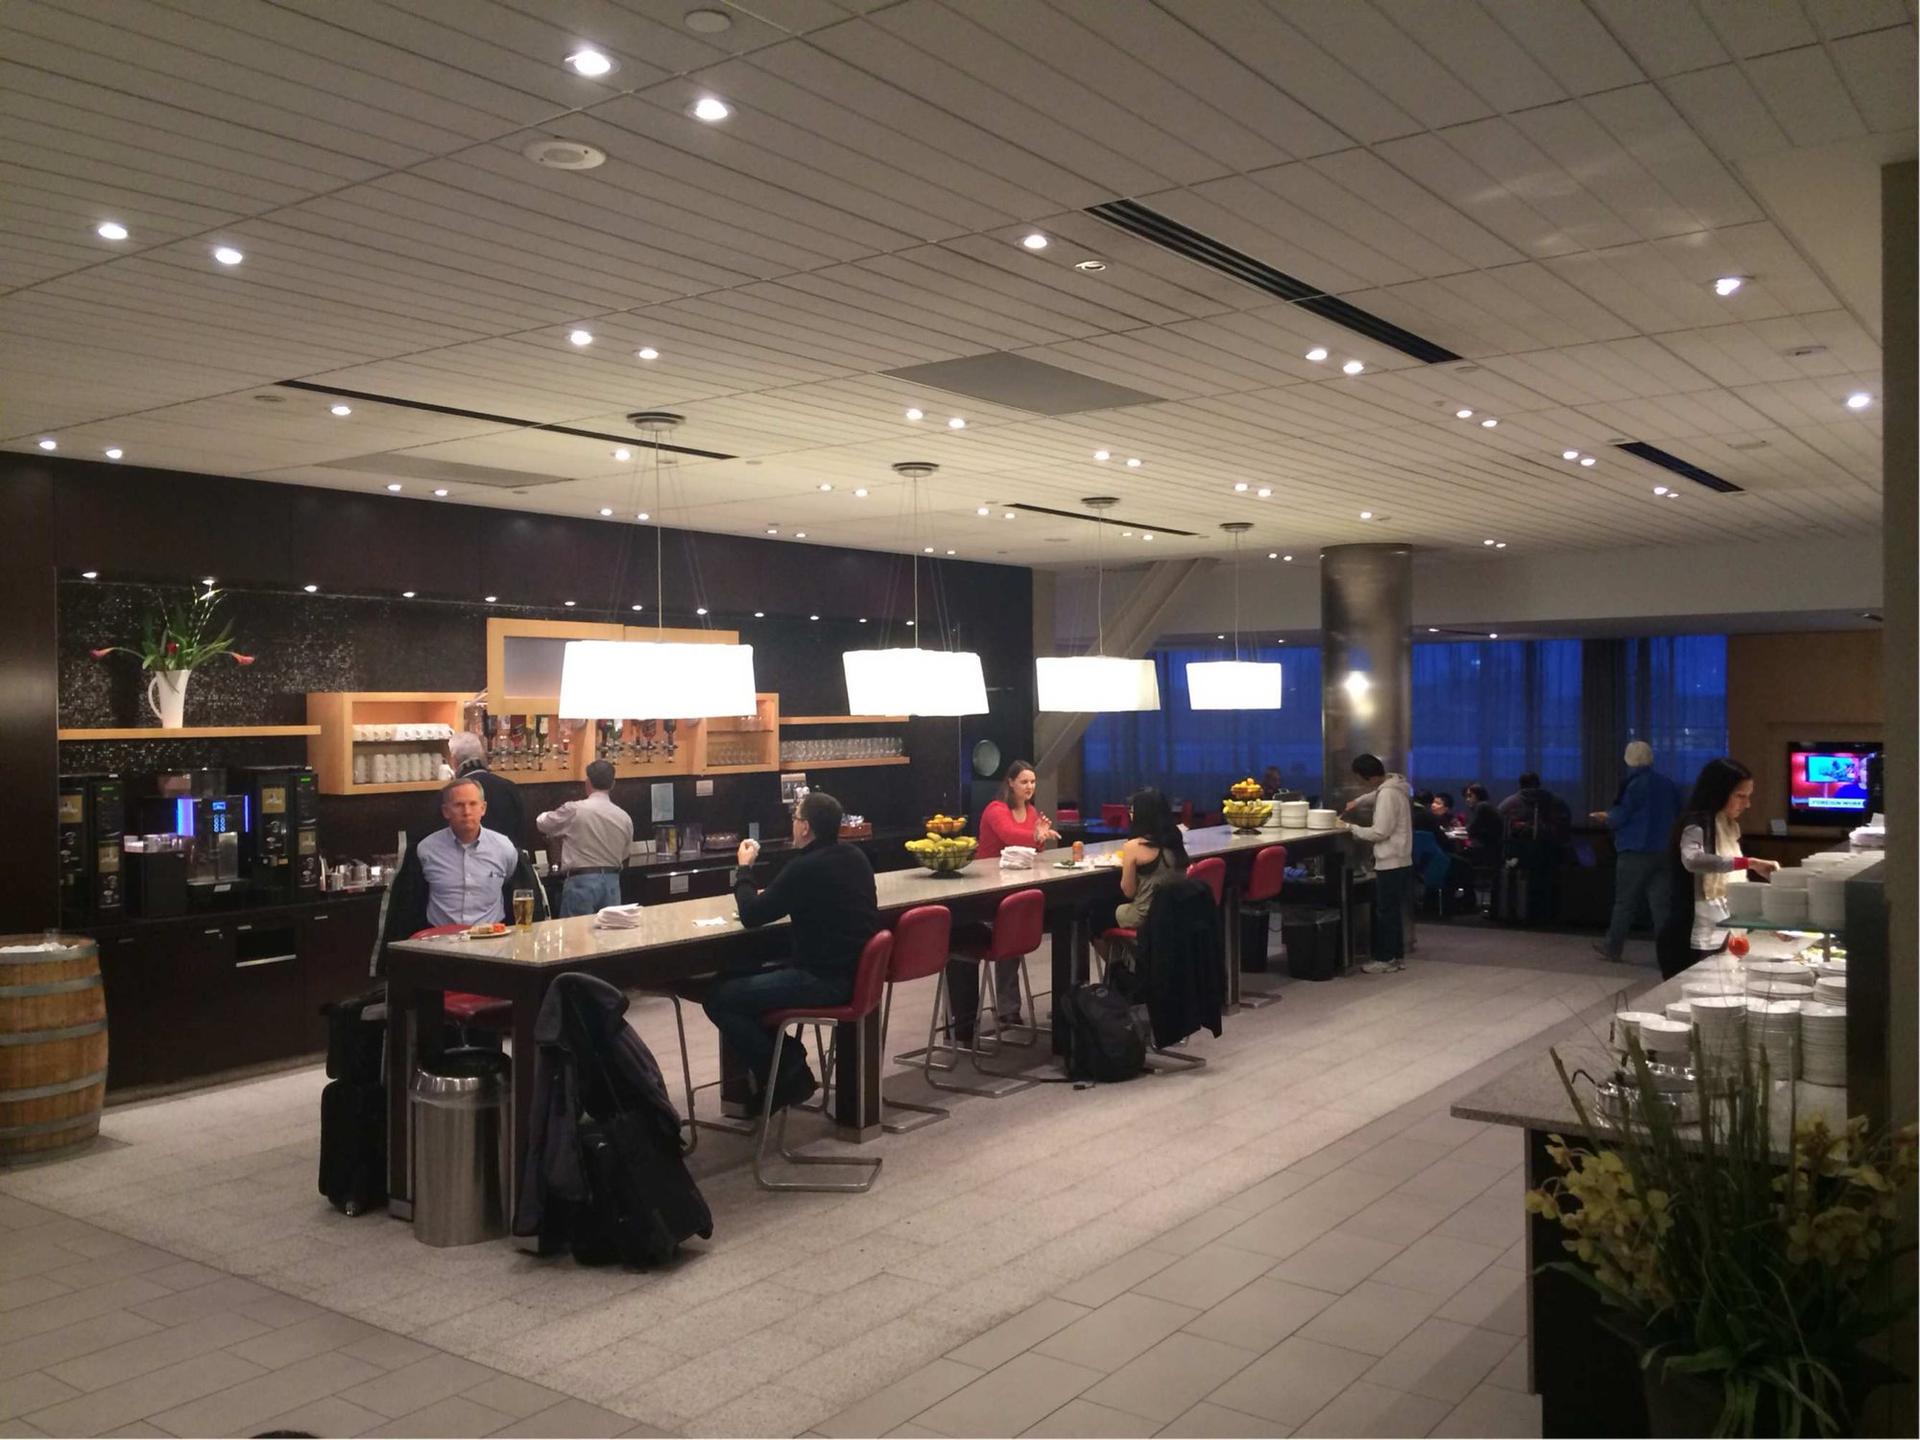 Air Canada Maple Leaf Lounge image 8 of 21